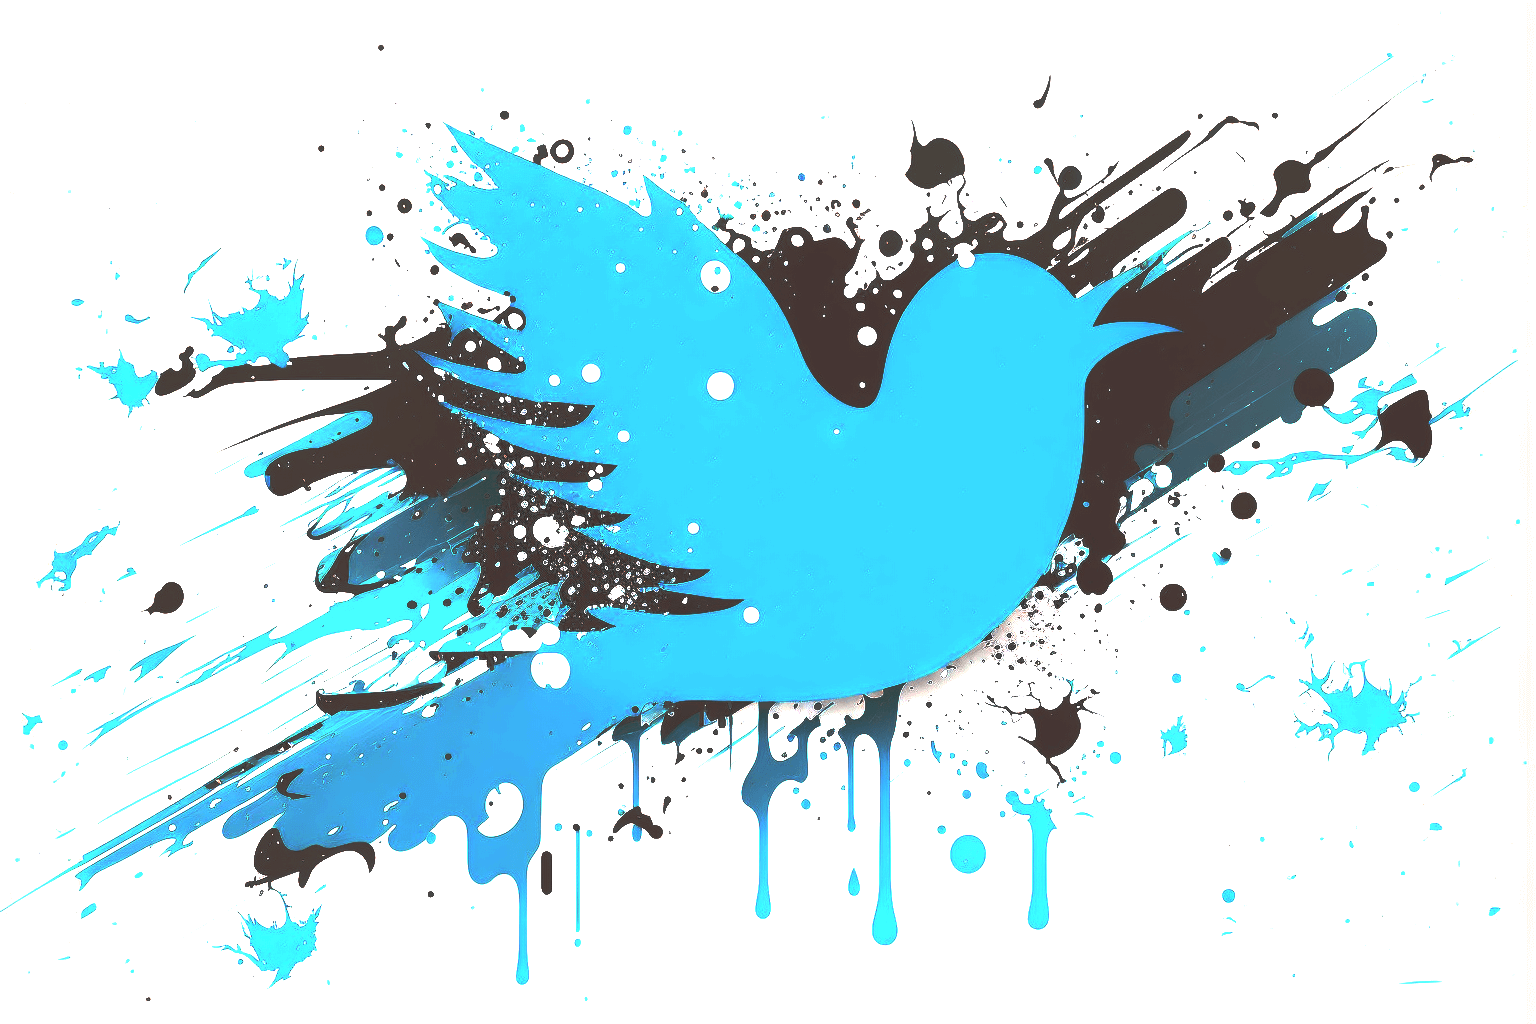 How to create a Twitter competitor, the right way